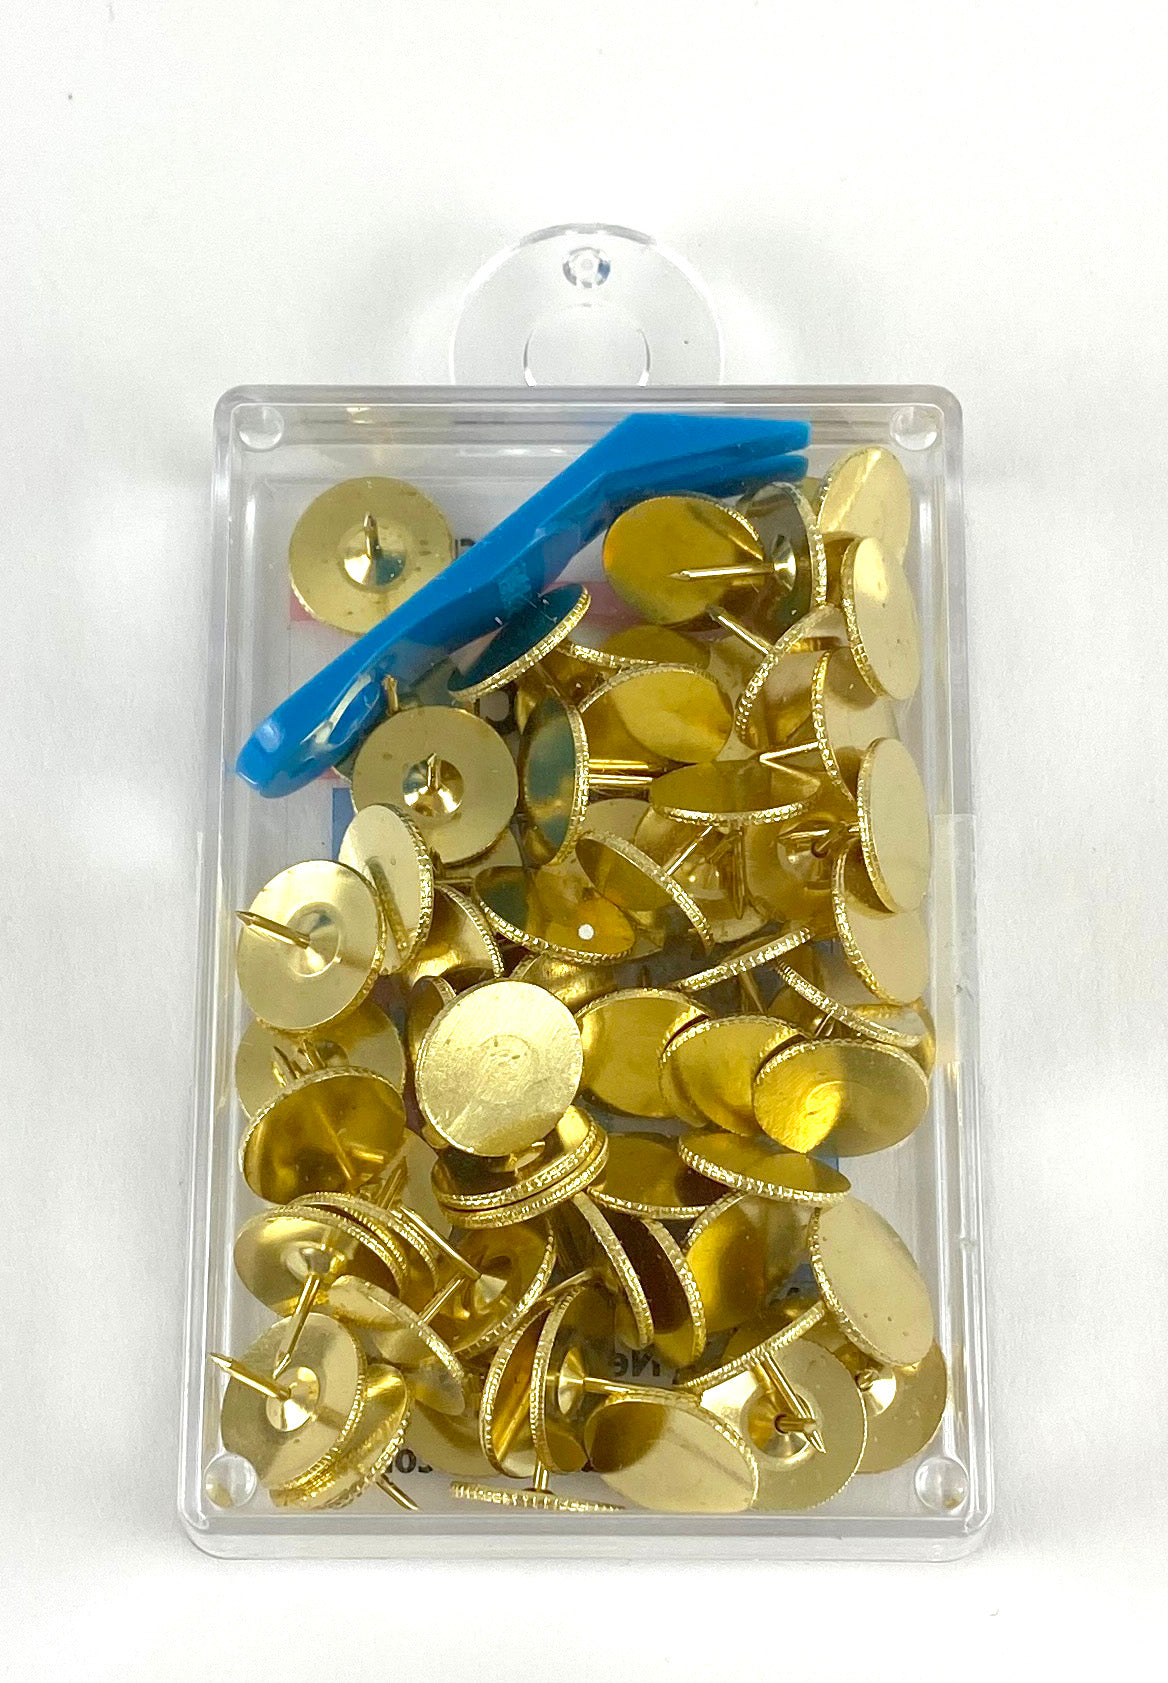 Brass Tacks with Remover & Case Non-rusting Thumb Tacks by